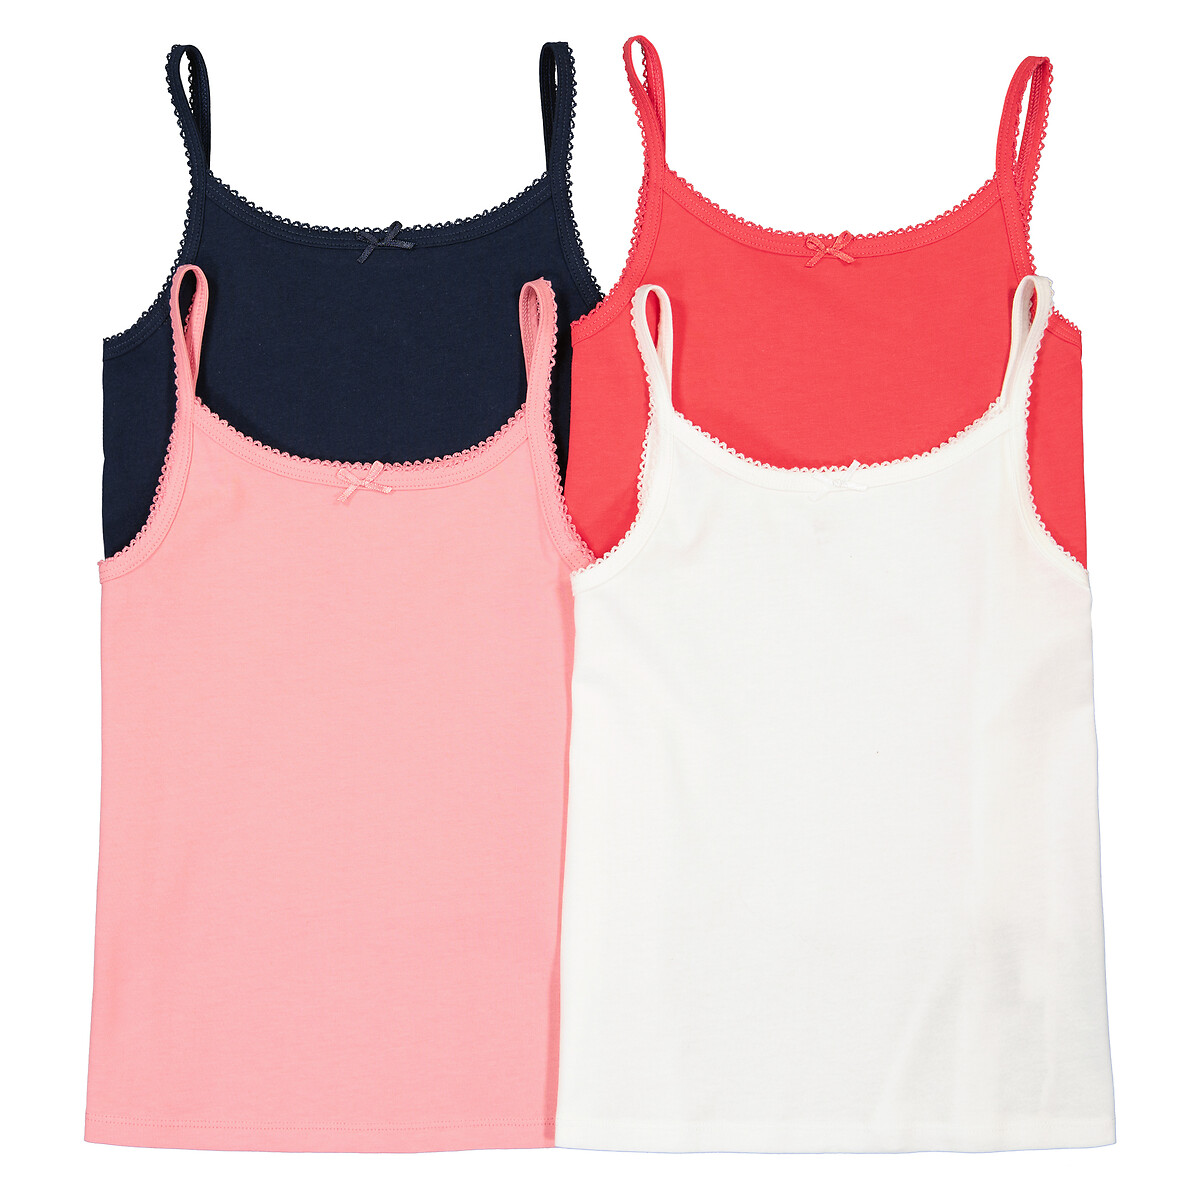 Pack of 4 Vest Tops in Plain Cotton